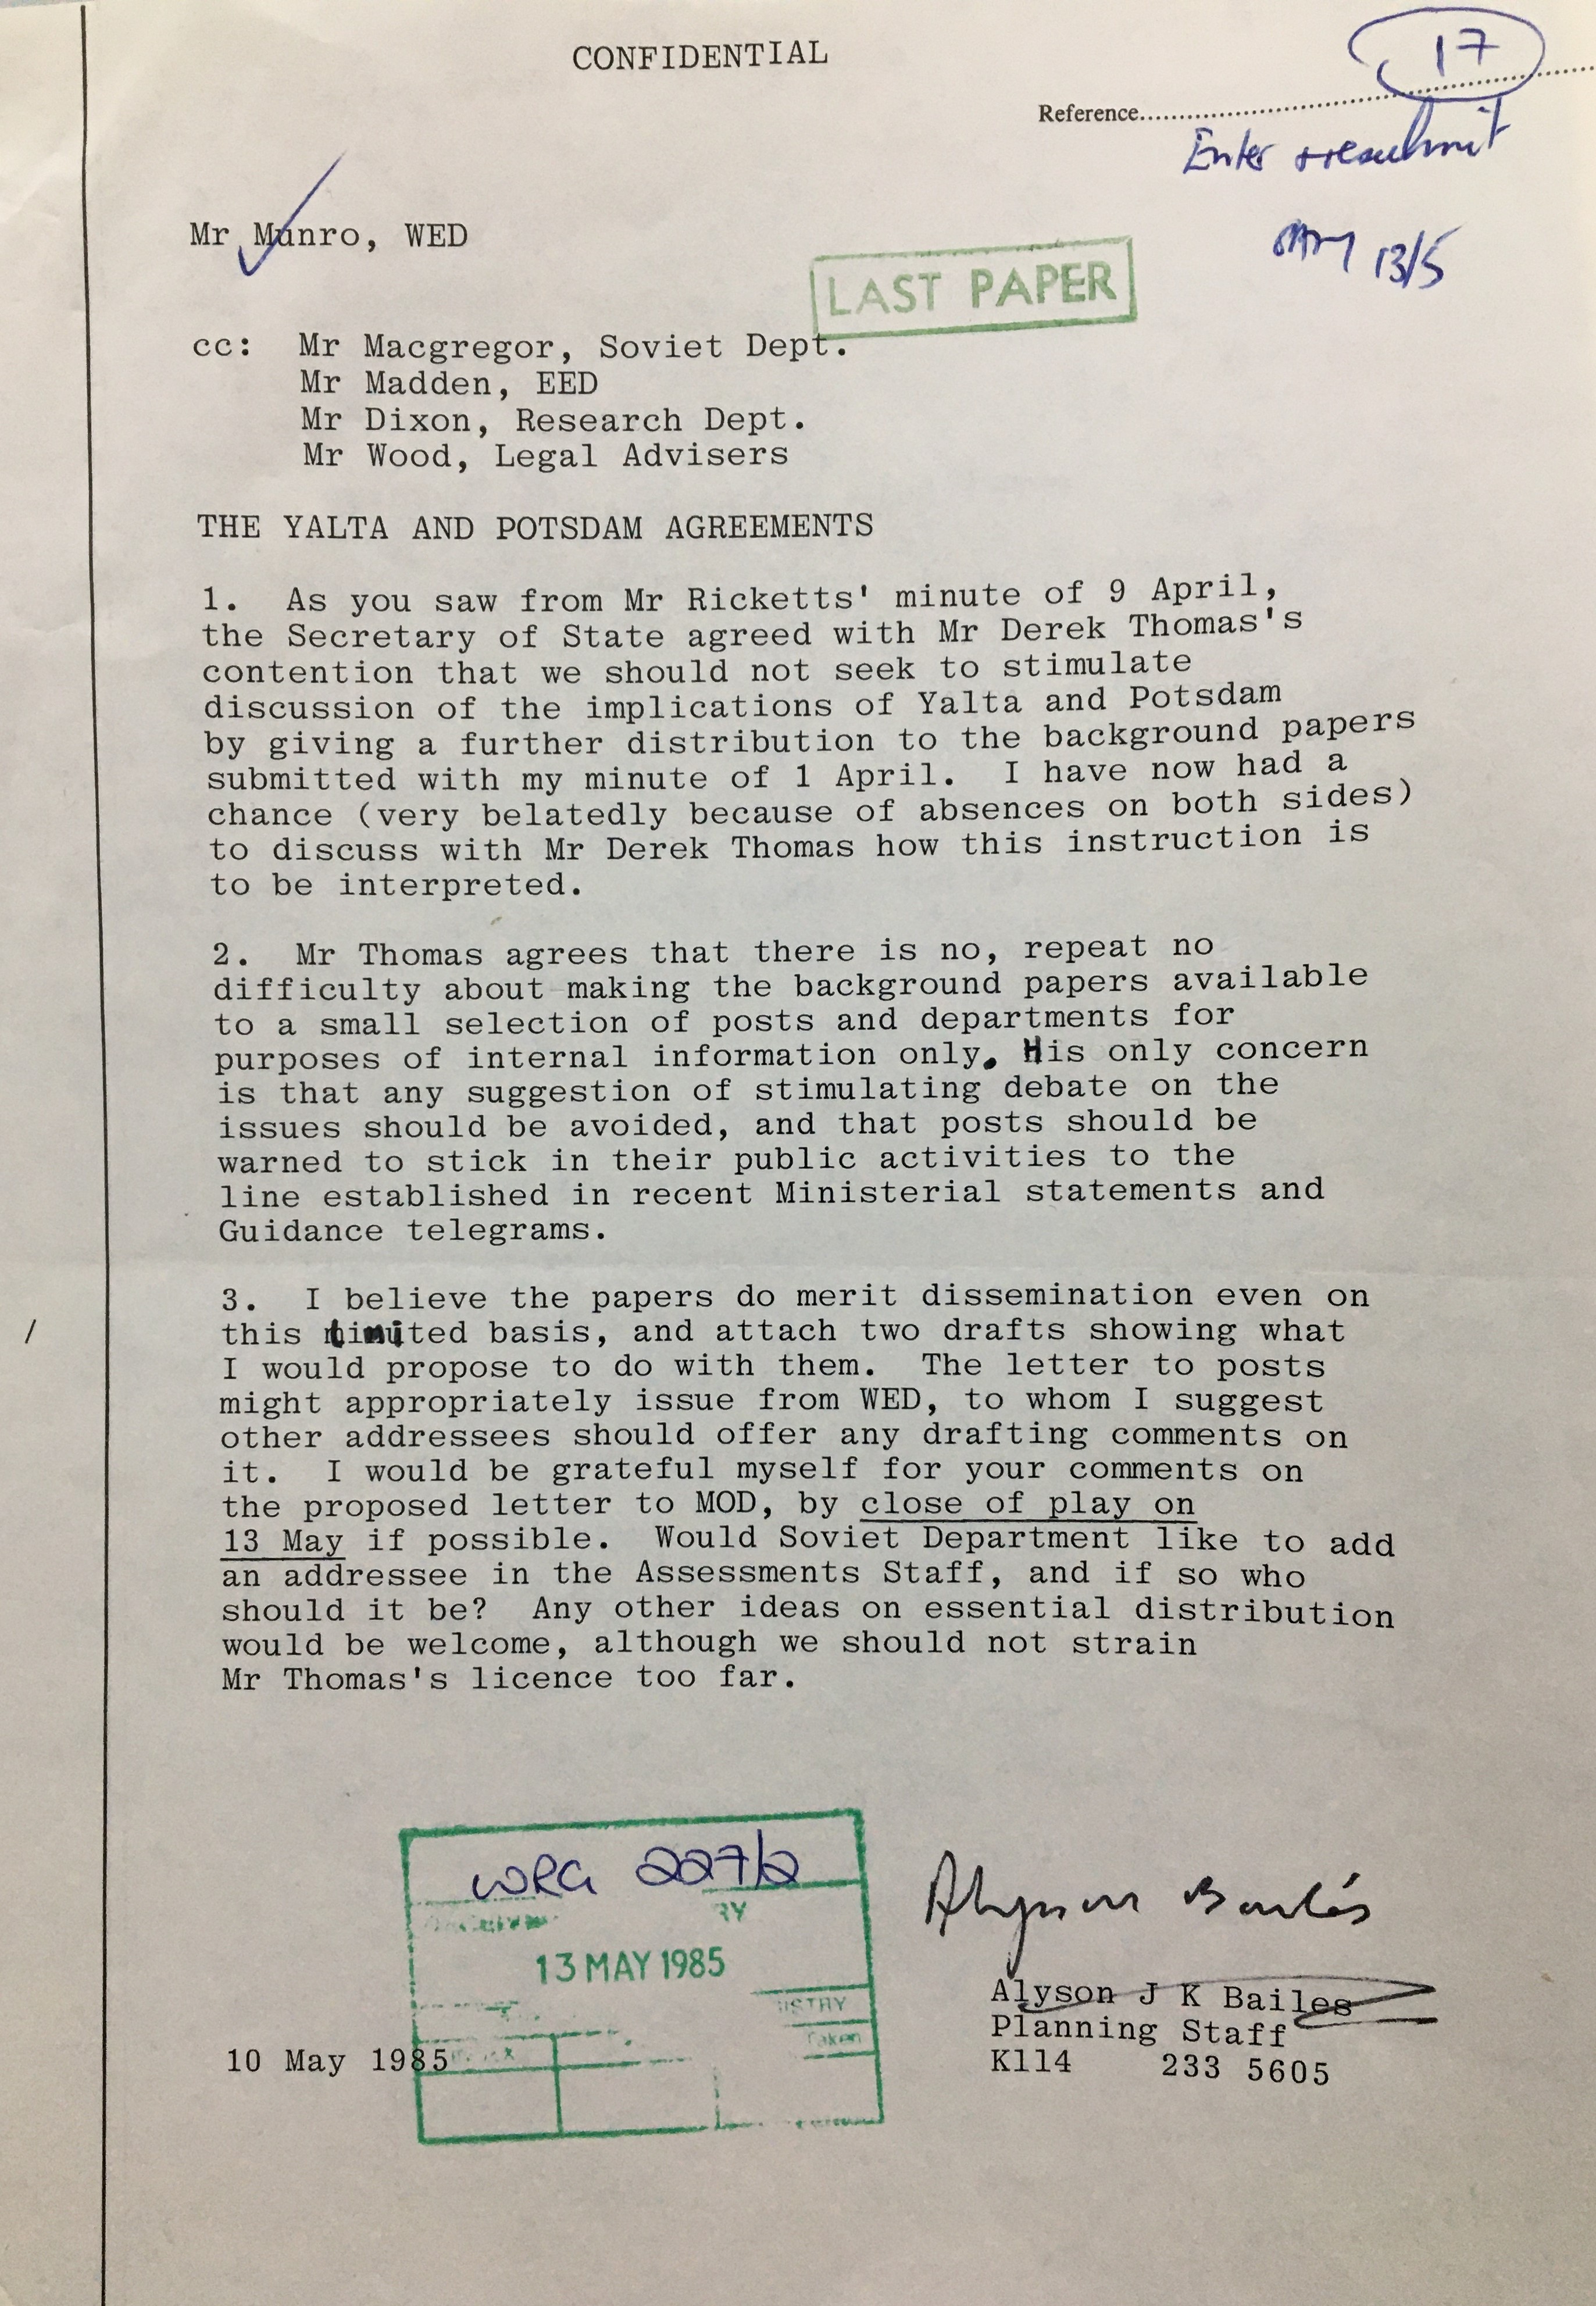 Typed document showing the Confidential FCO Internal Minute on Yalta and Potsdam Agreements, 13 May 1985.